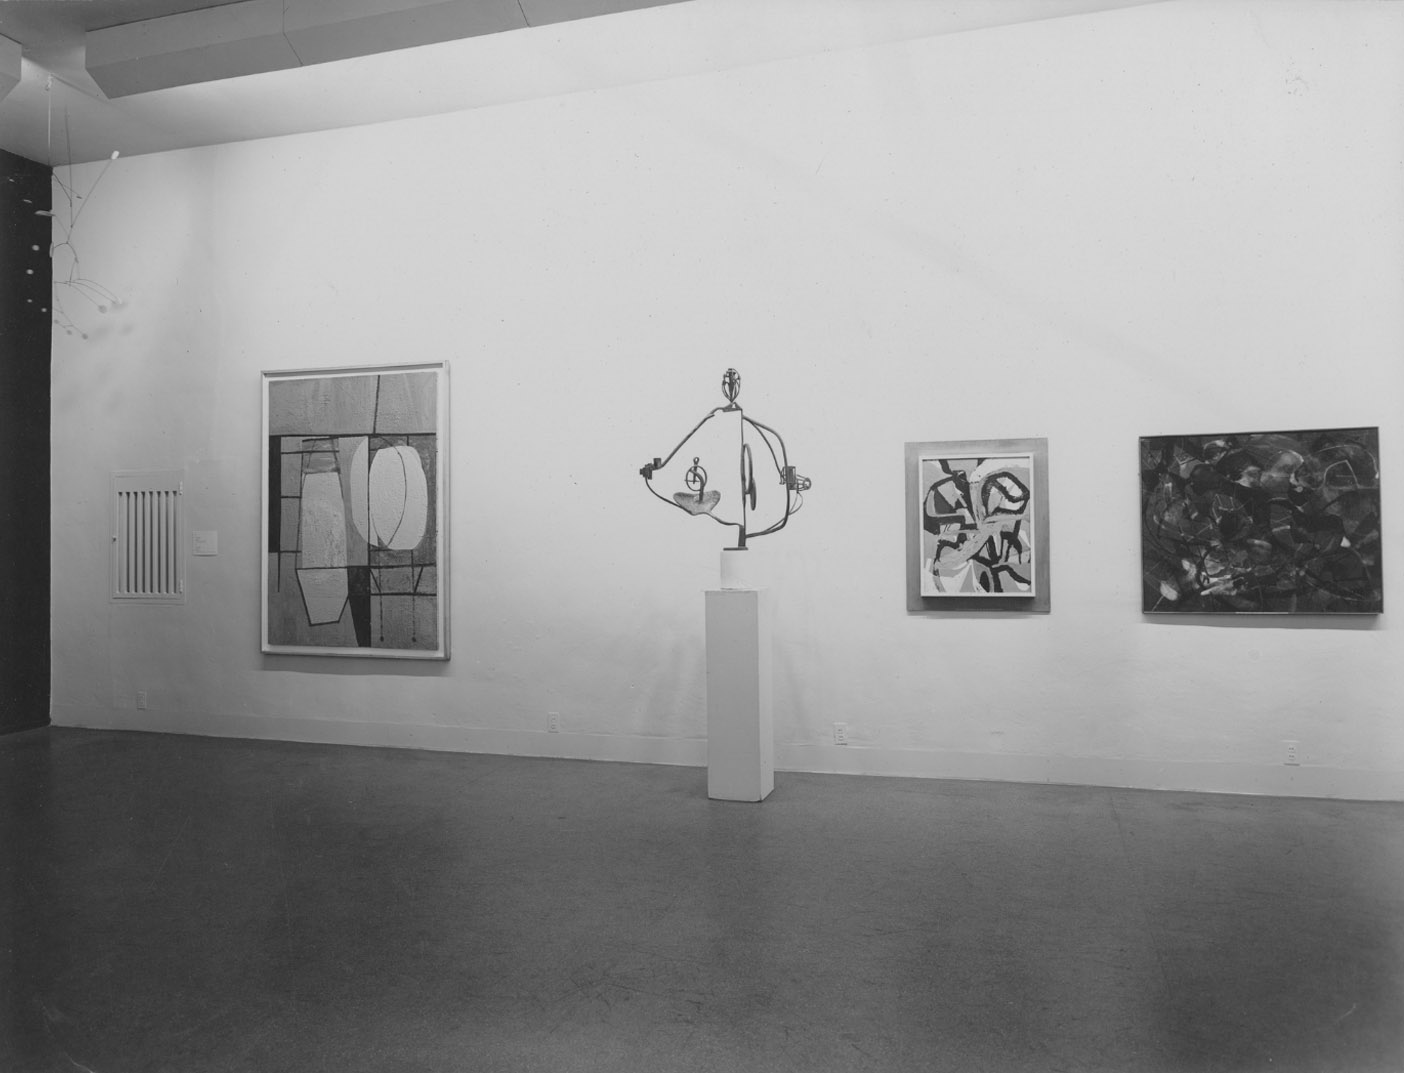 AbstractPaintingandSculpture Moma 1951